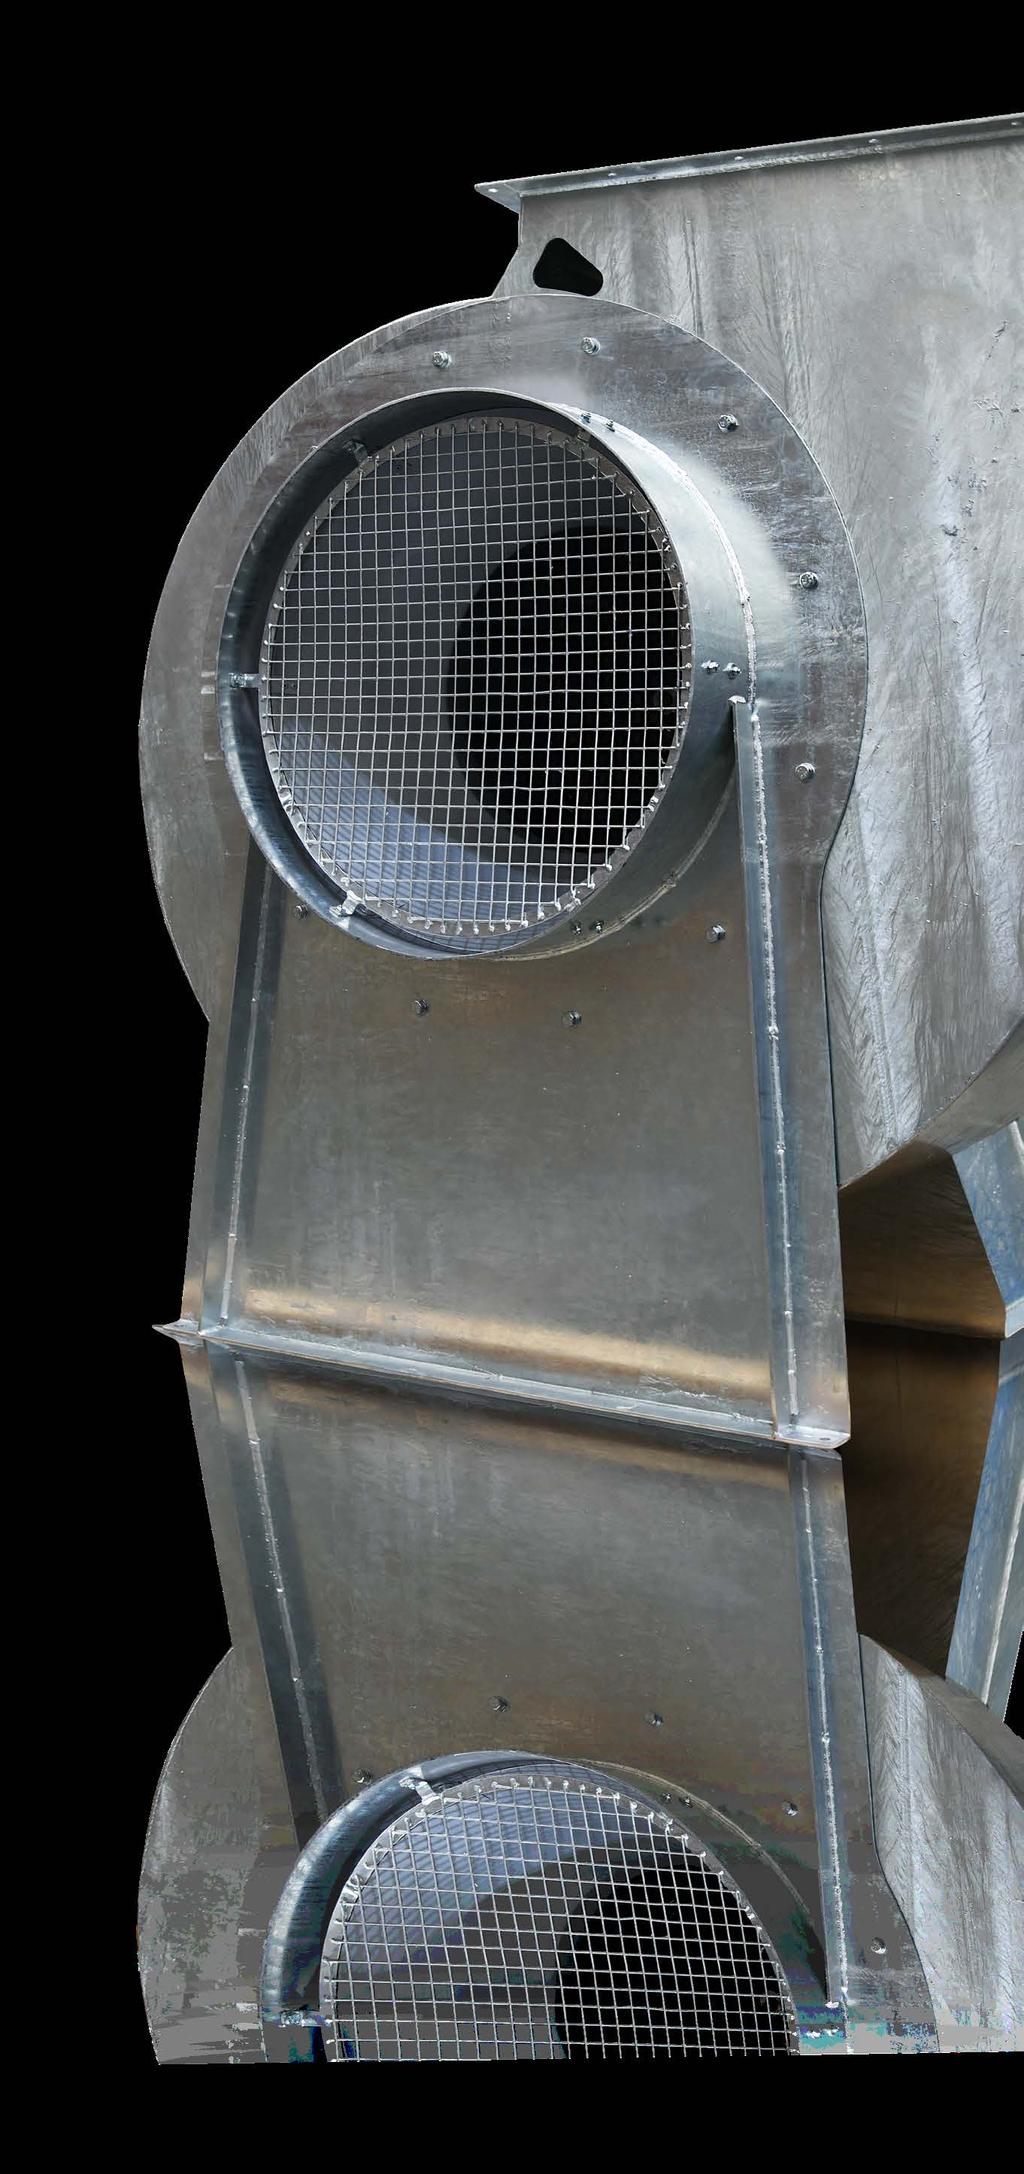 Achieves high pressure and low noise output The Blue Rhino range comes standard with a durable hot dip galvanised finish to protect it from harsh environmental conditions such as those found near